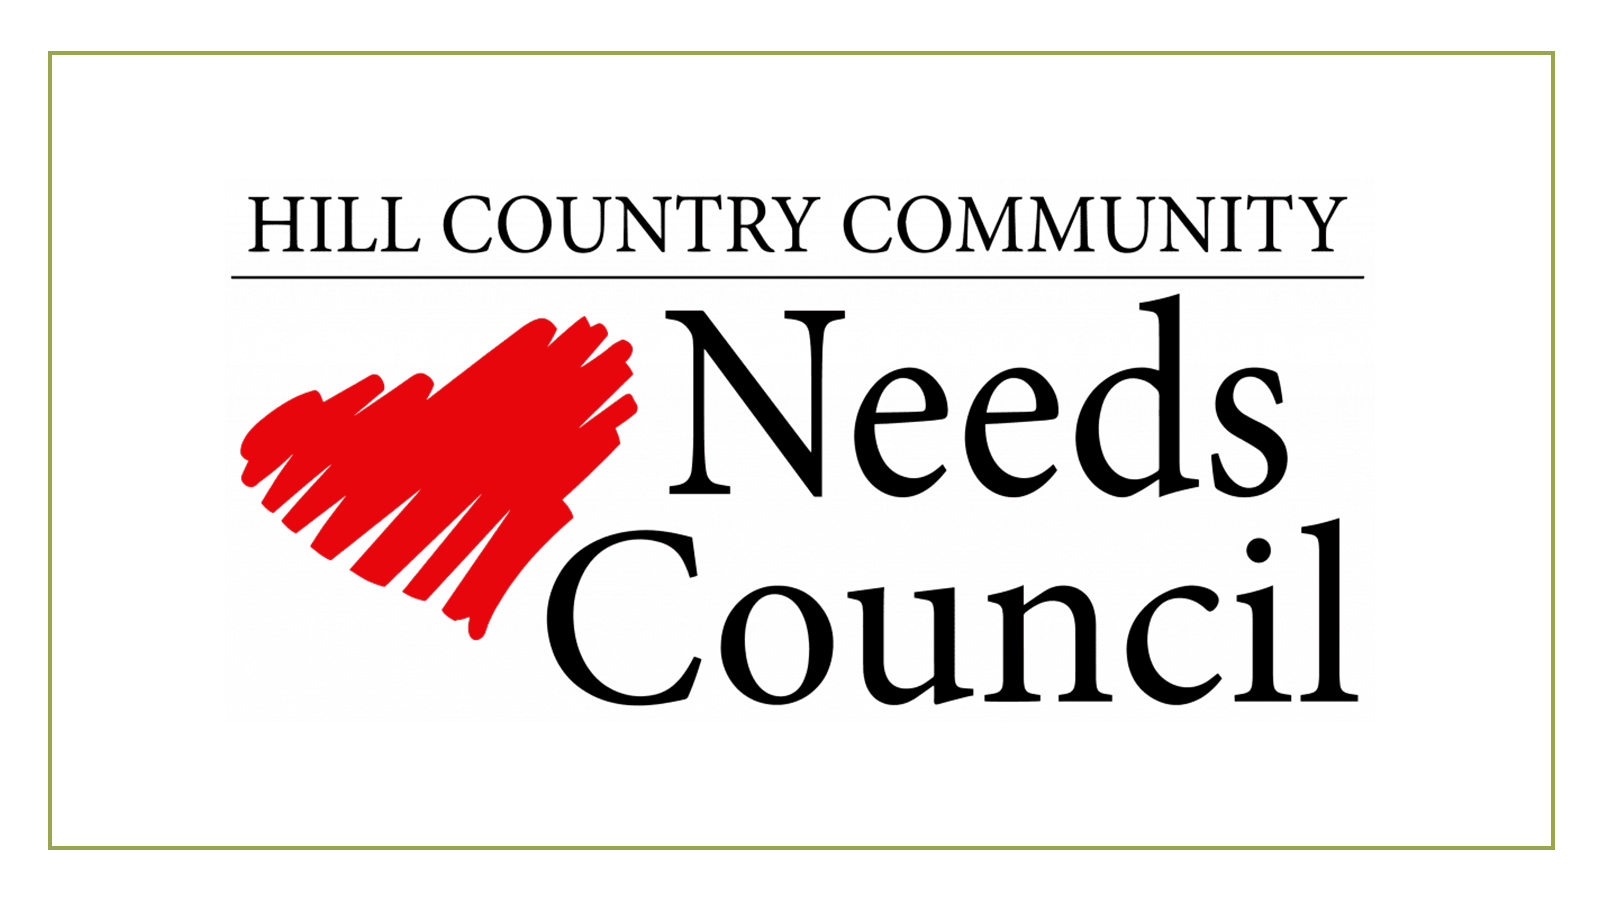 Hill Country Community Needs Council logo